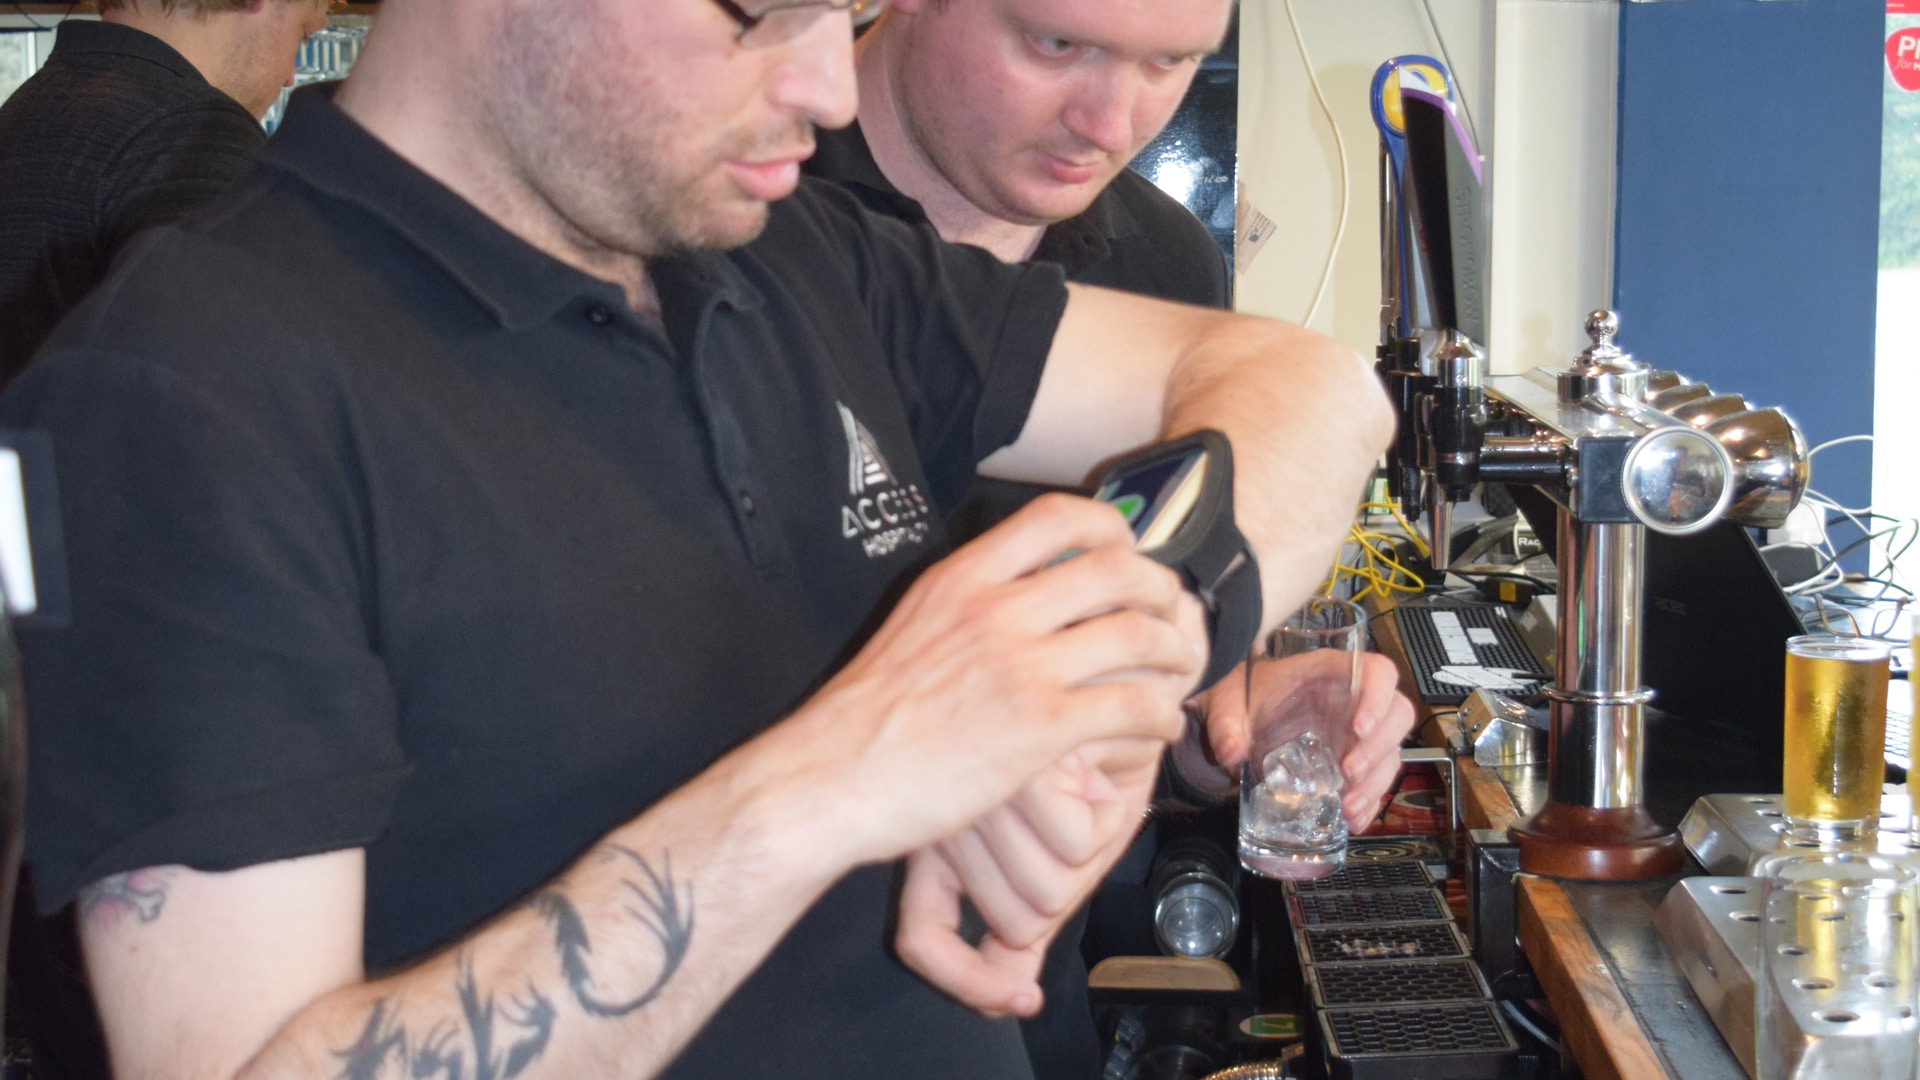 Magpies members behind a bar using smart devices around their wrists